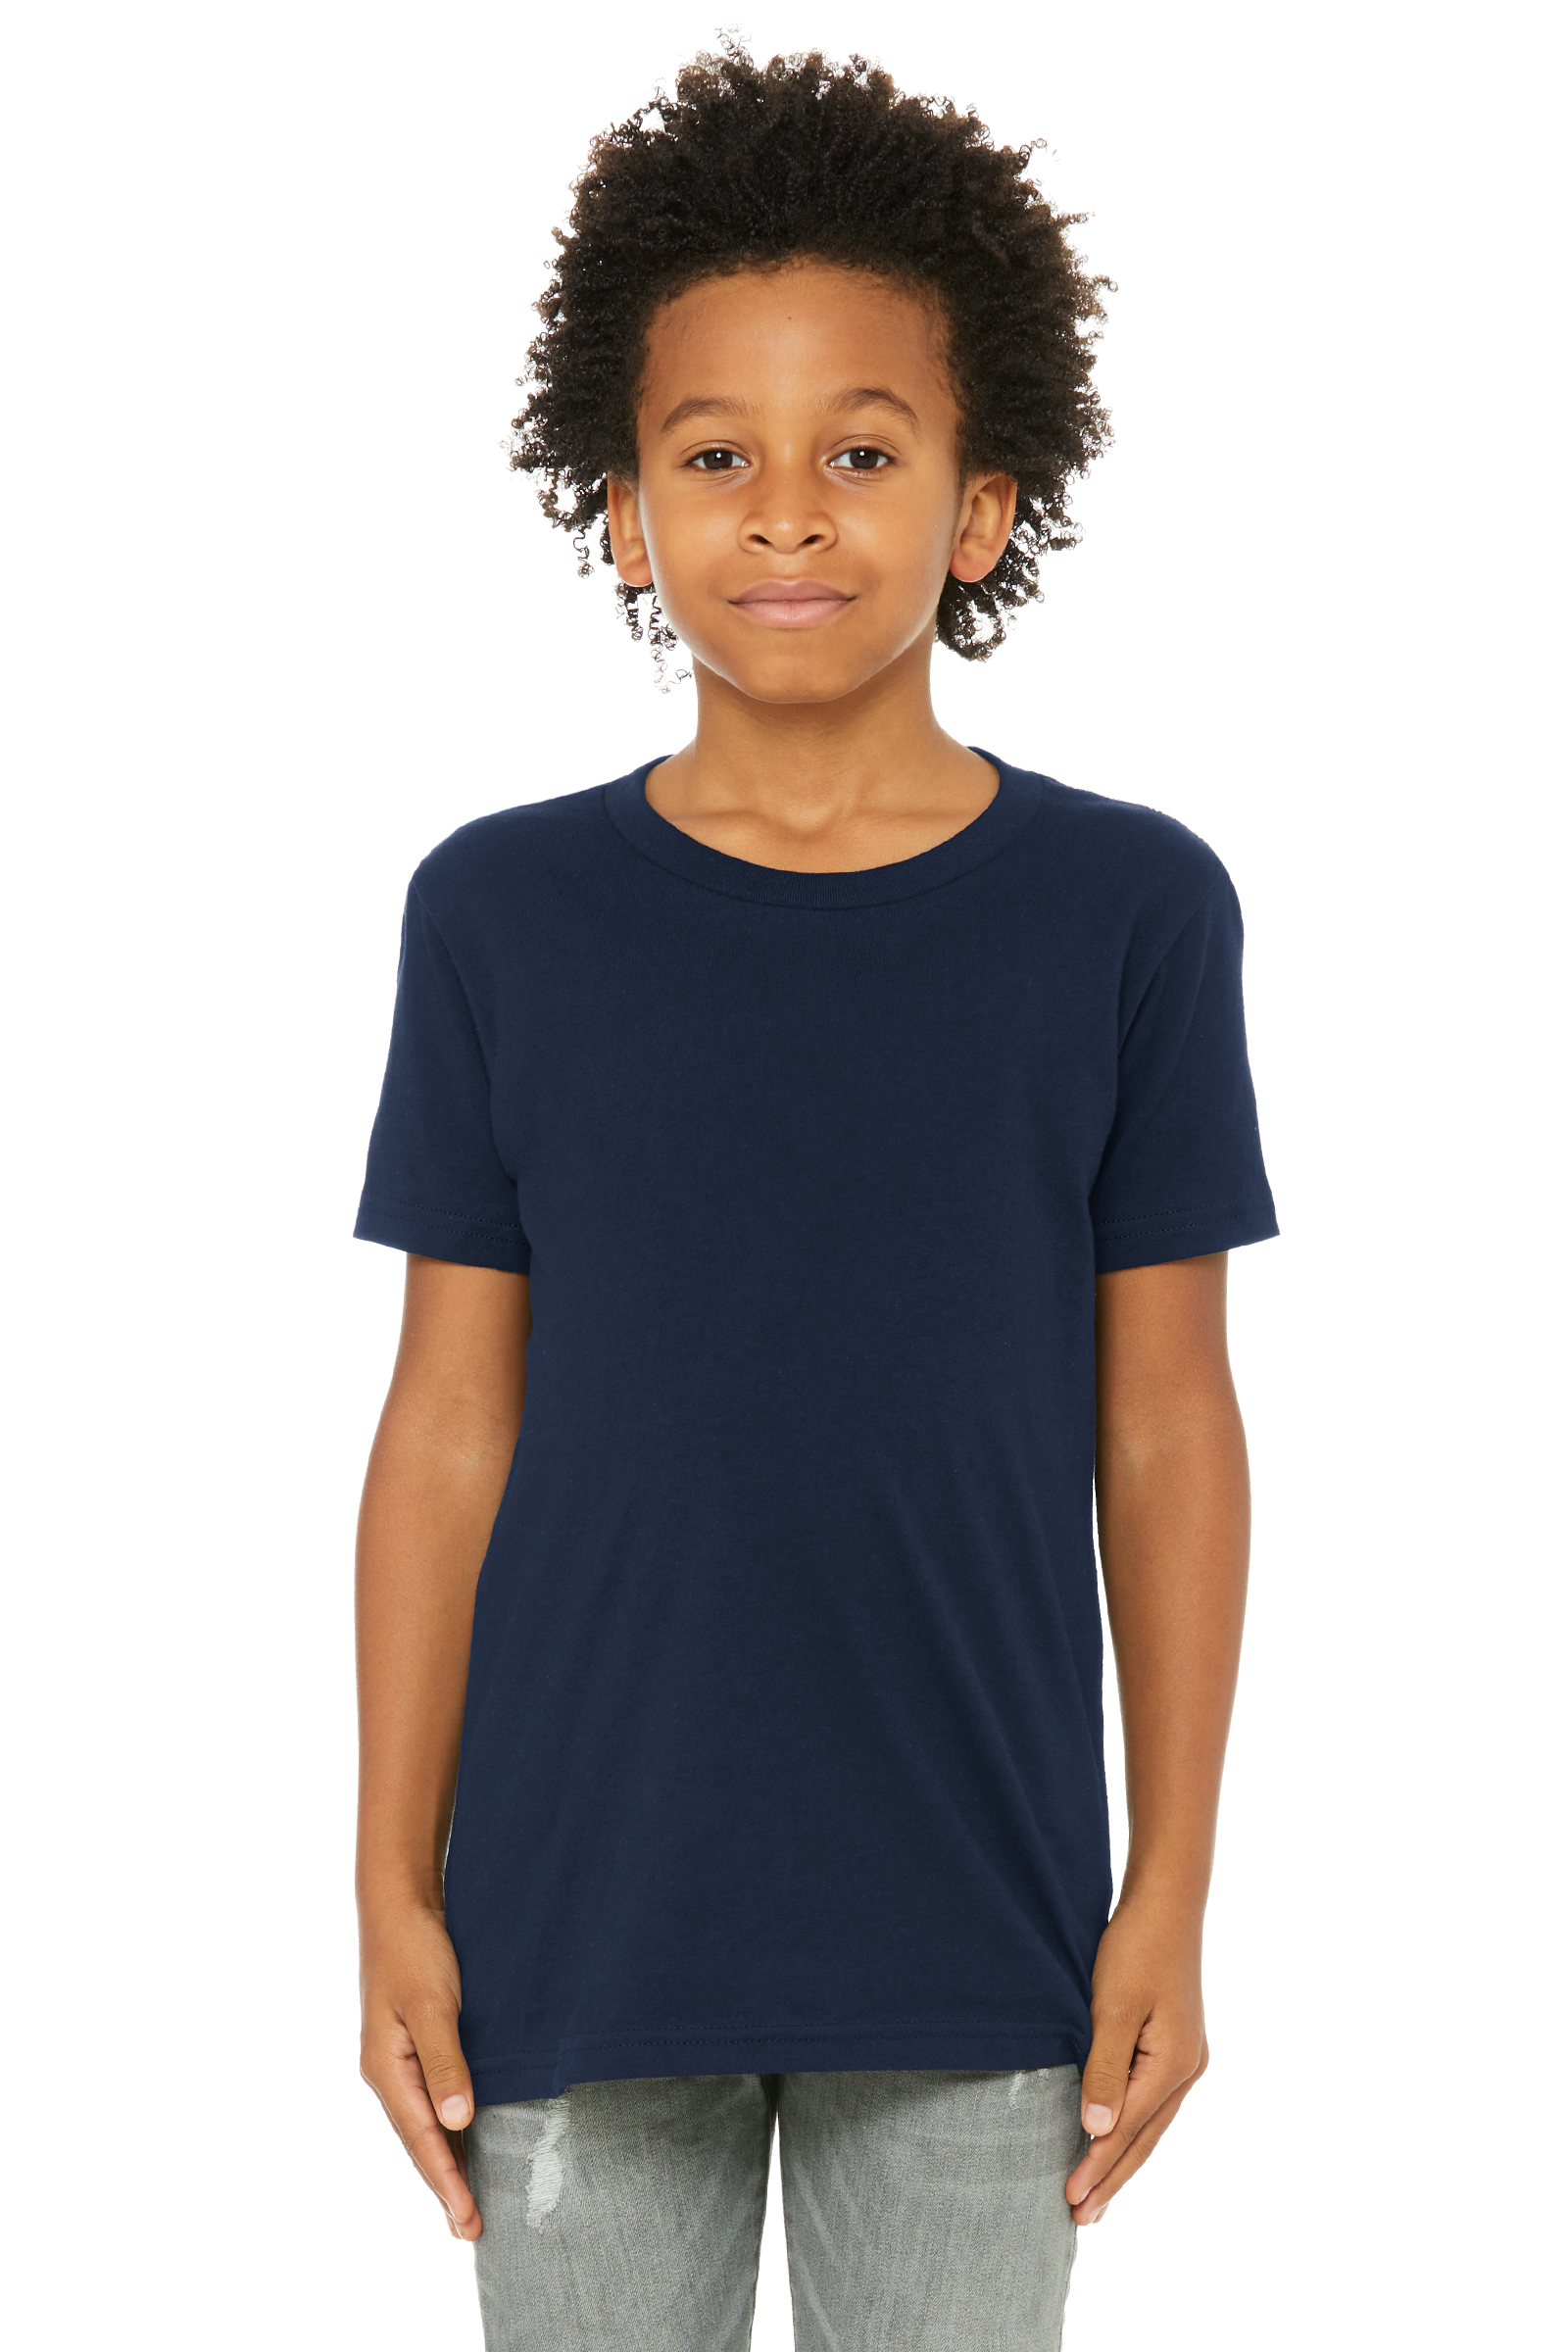 Canvas Youth Jersey Short Sleeve Tee